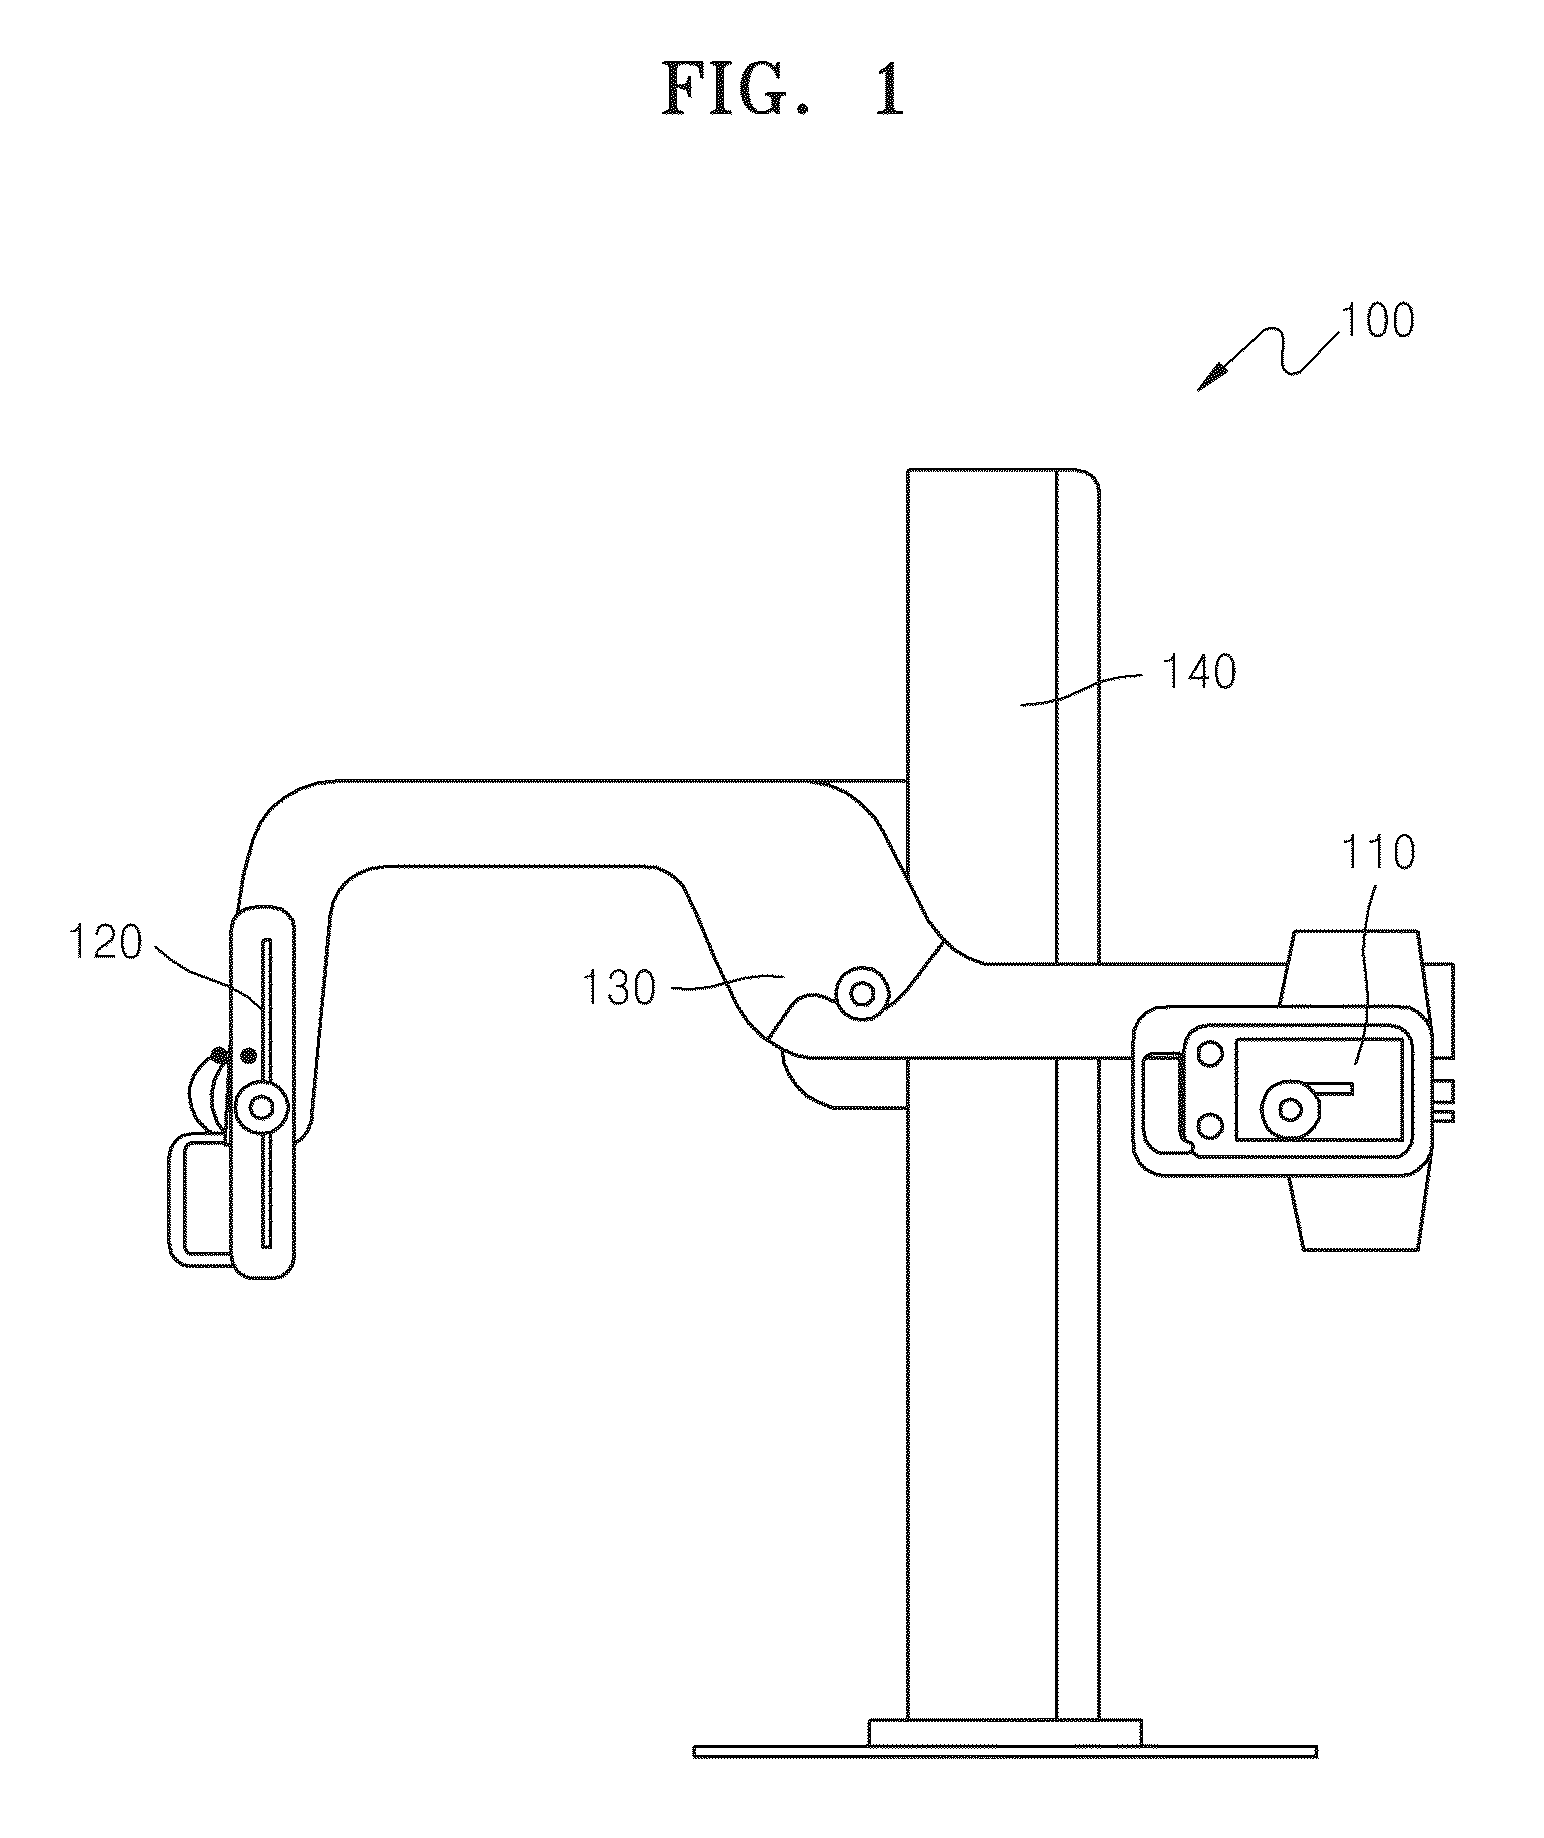 X-ray apparatus and method of obtaining X-ray image